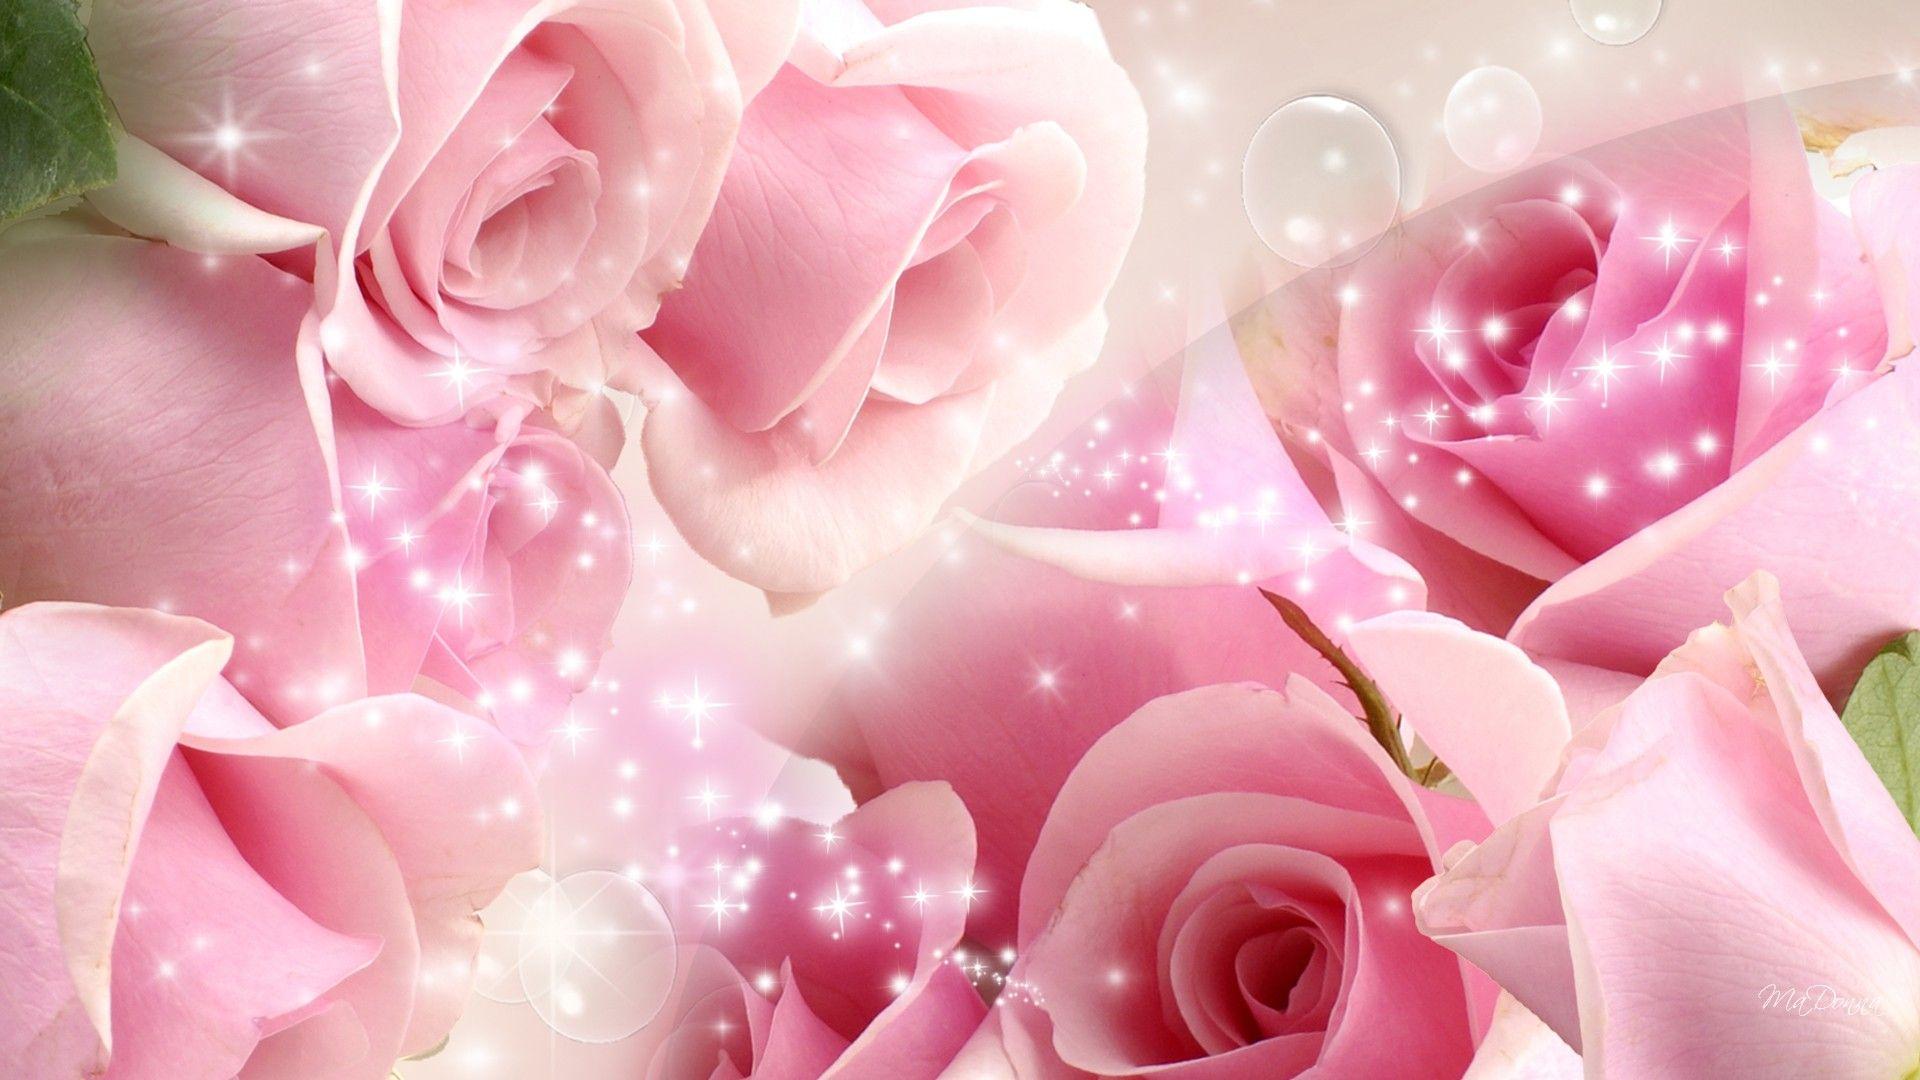 White And Pink Roses Wallpapers Top Free White And Pink Roses Backgrounds Wallpaperaccess